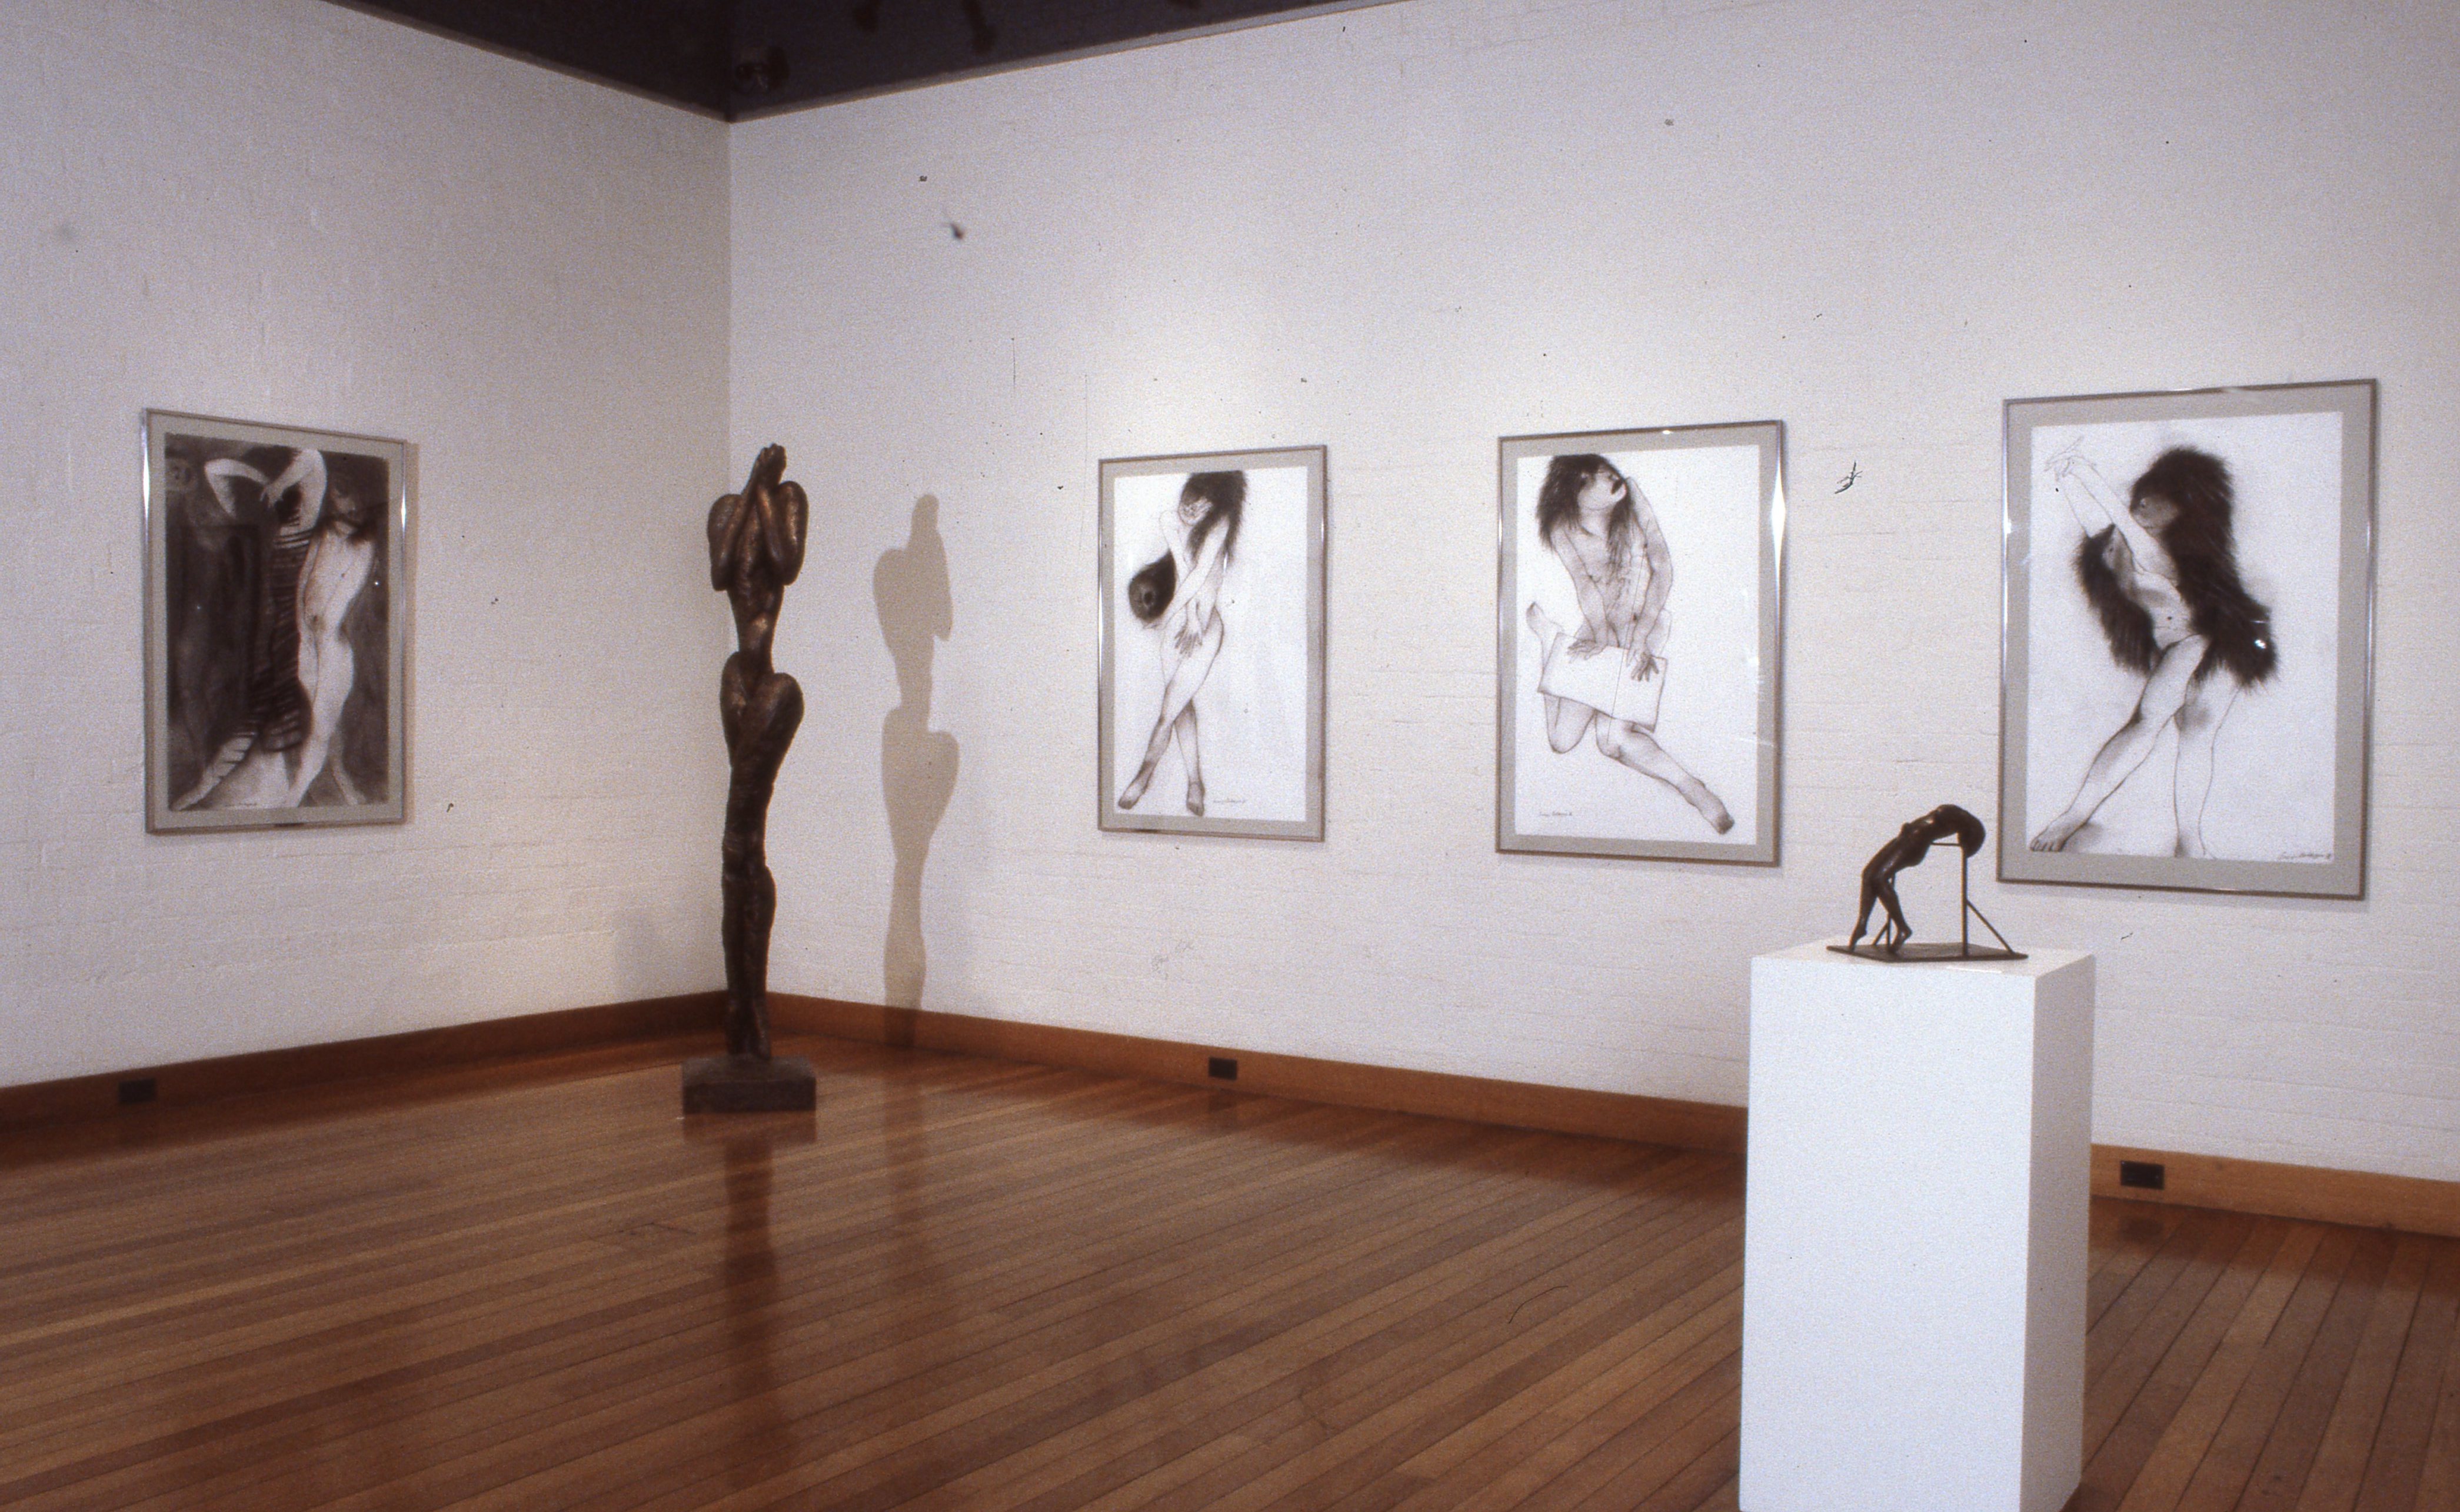 idg_archive_1991_george_baldessin_1939-1978_drawings_and_selected_scupture_001_install.jpg